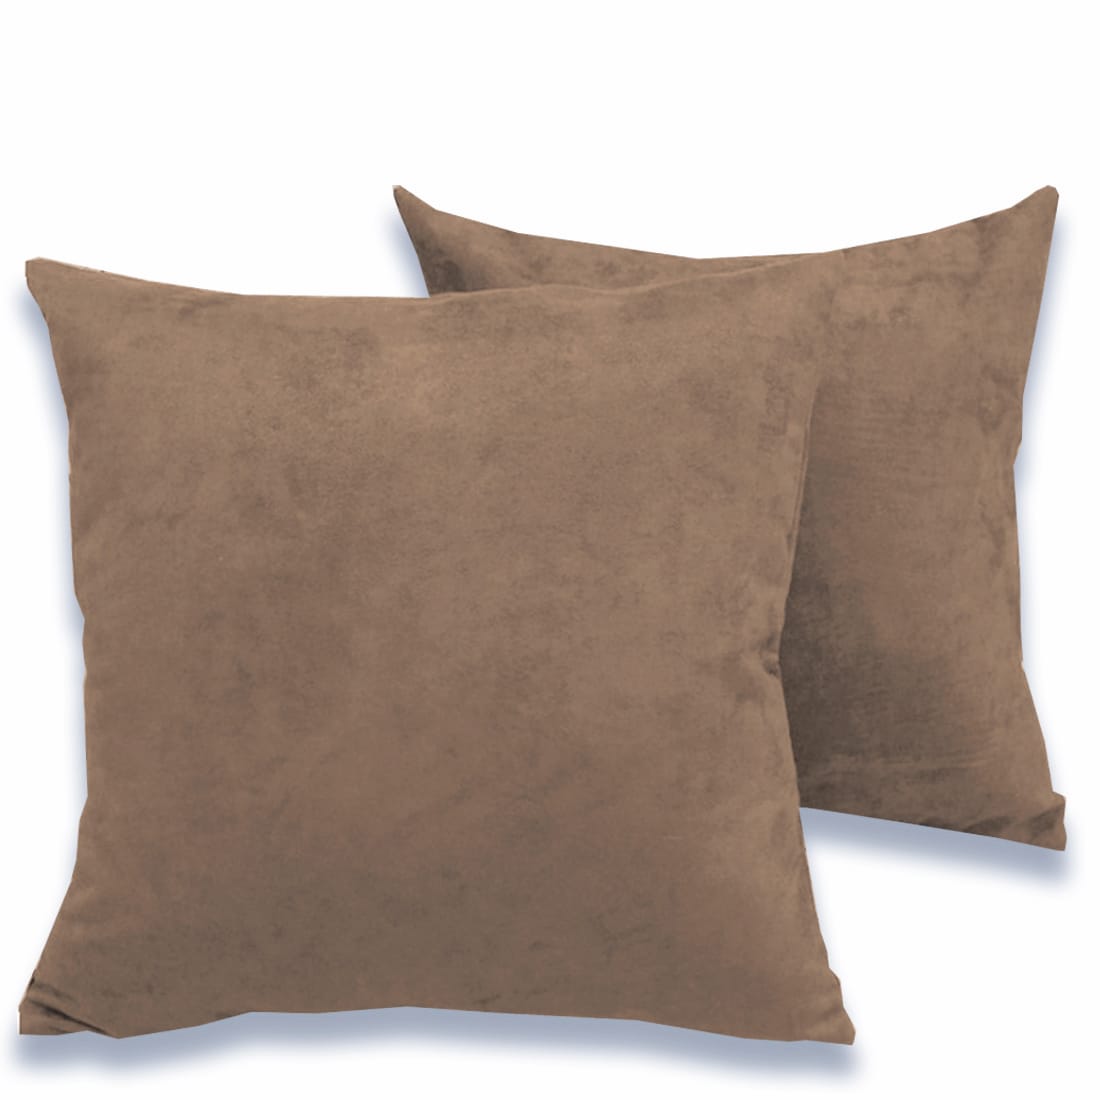 Luxurious Microfiber Suede Velvet Cushion Cover Set in Sand online in India